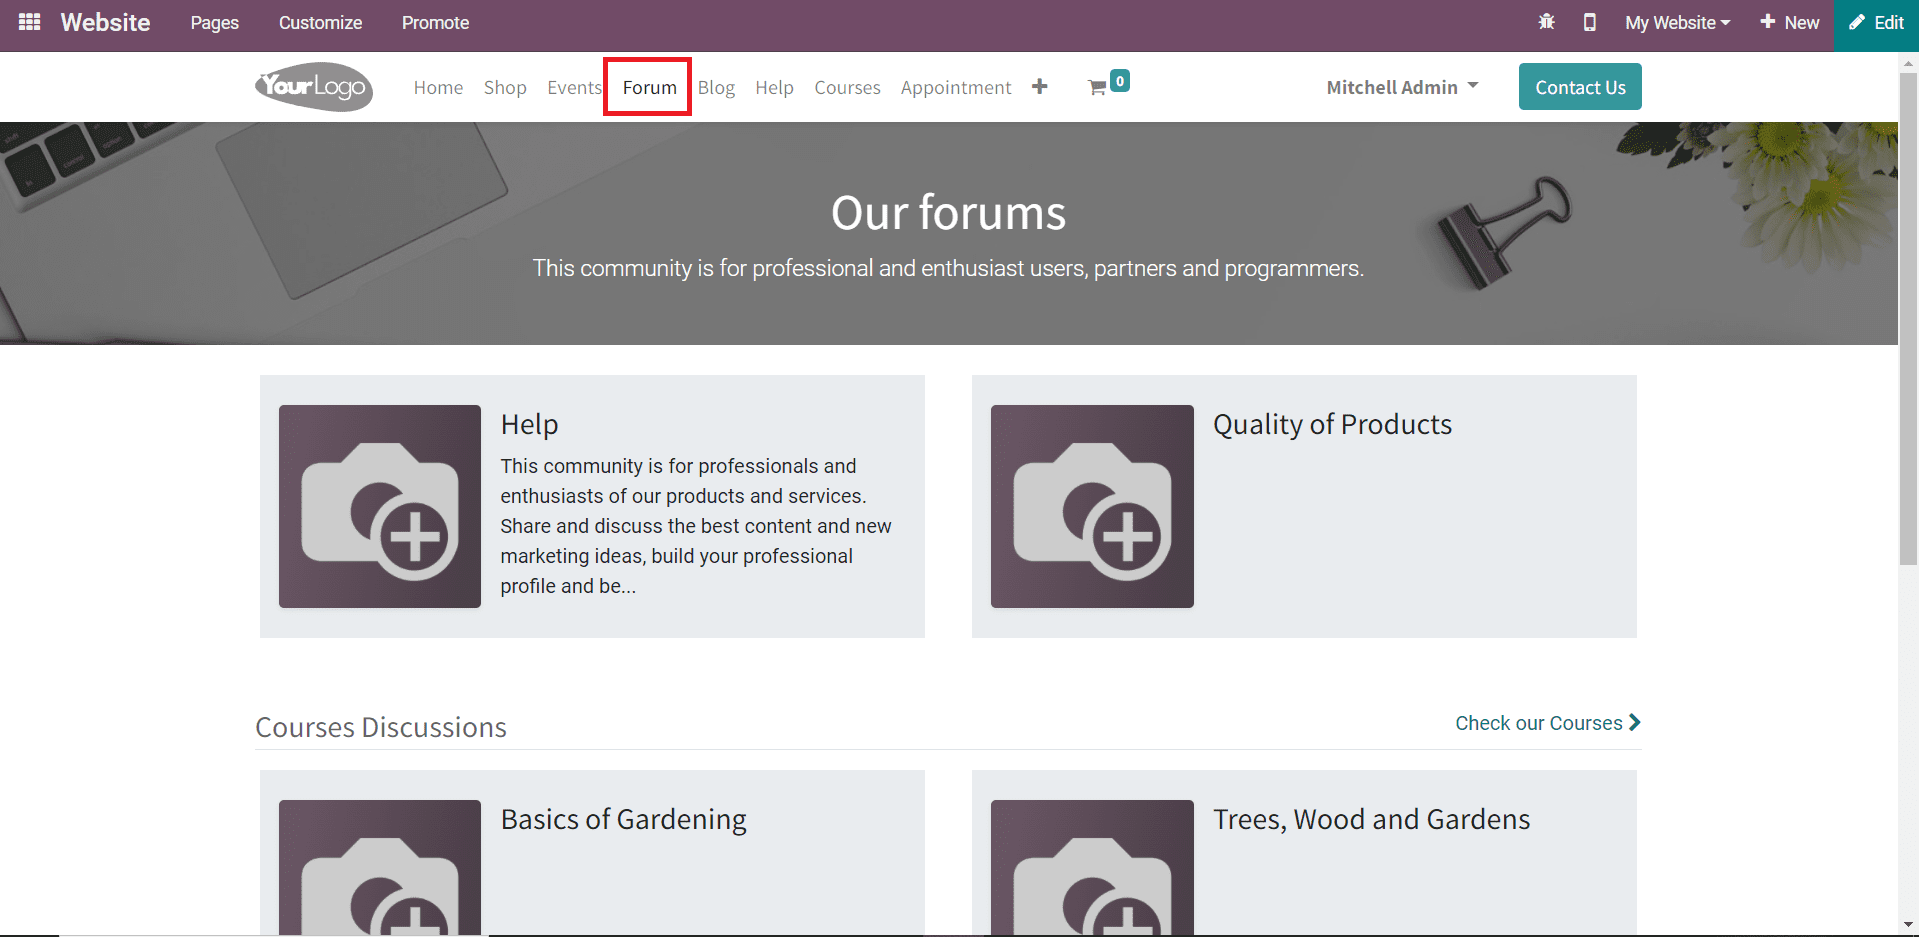 how-to-create-manage-new-forums-using-odoo-15-website-cybrosys